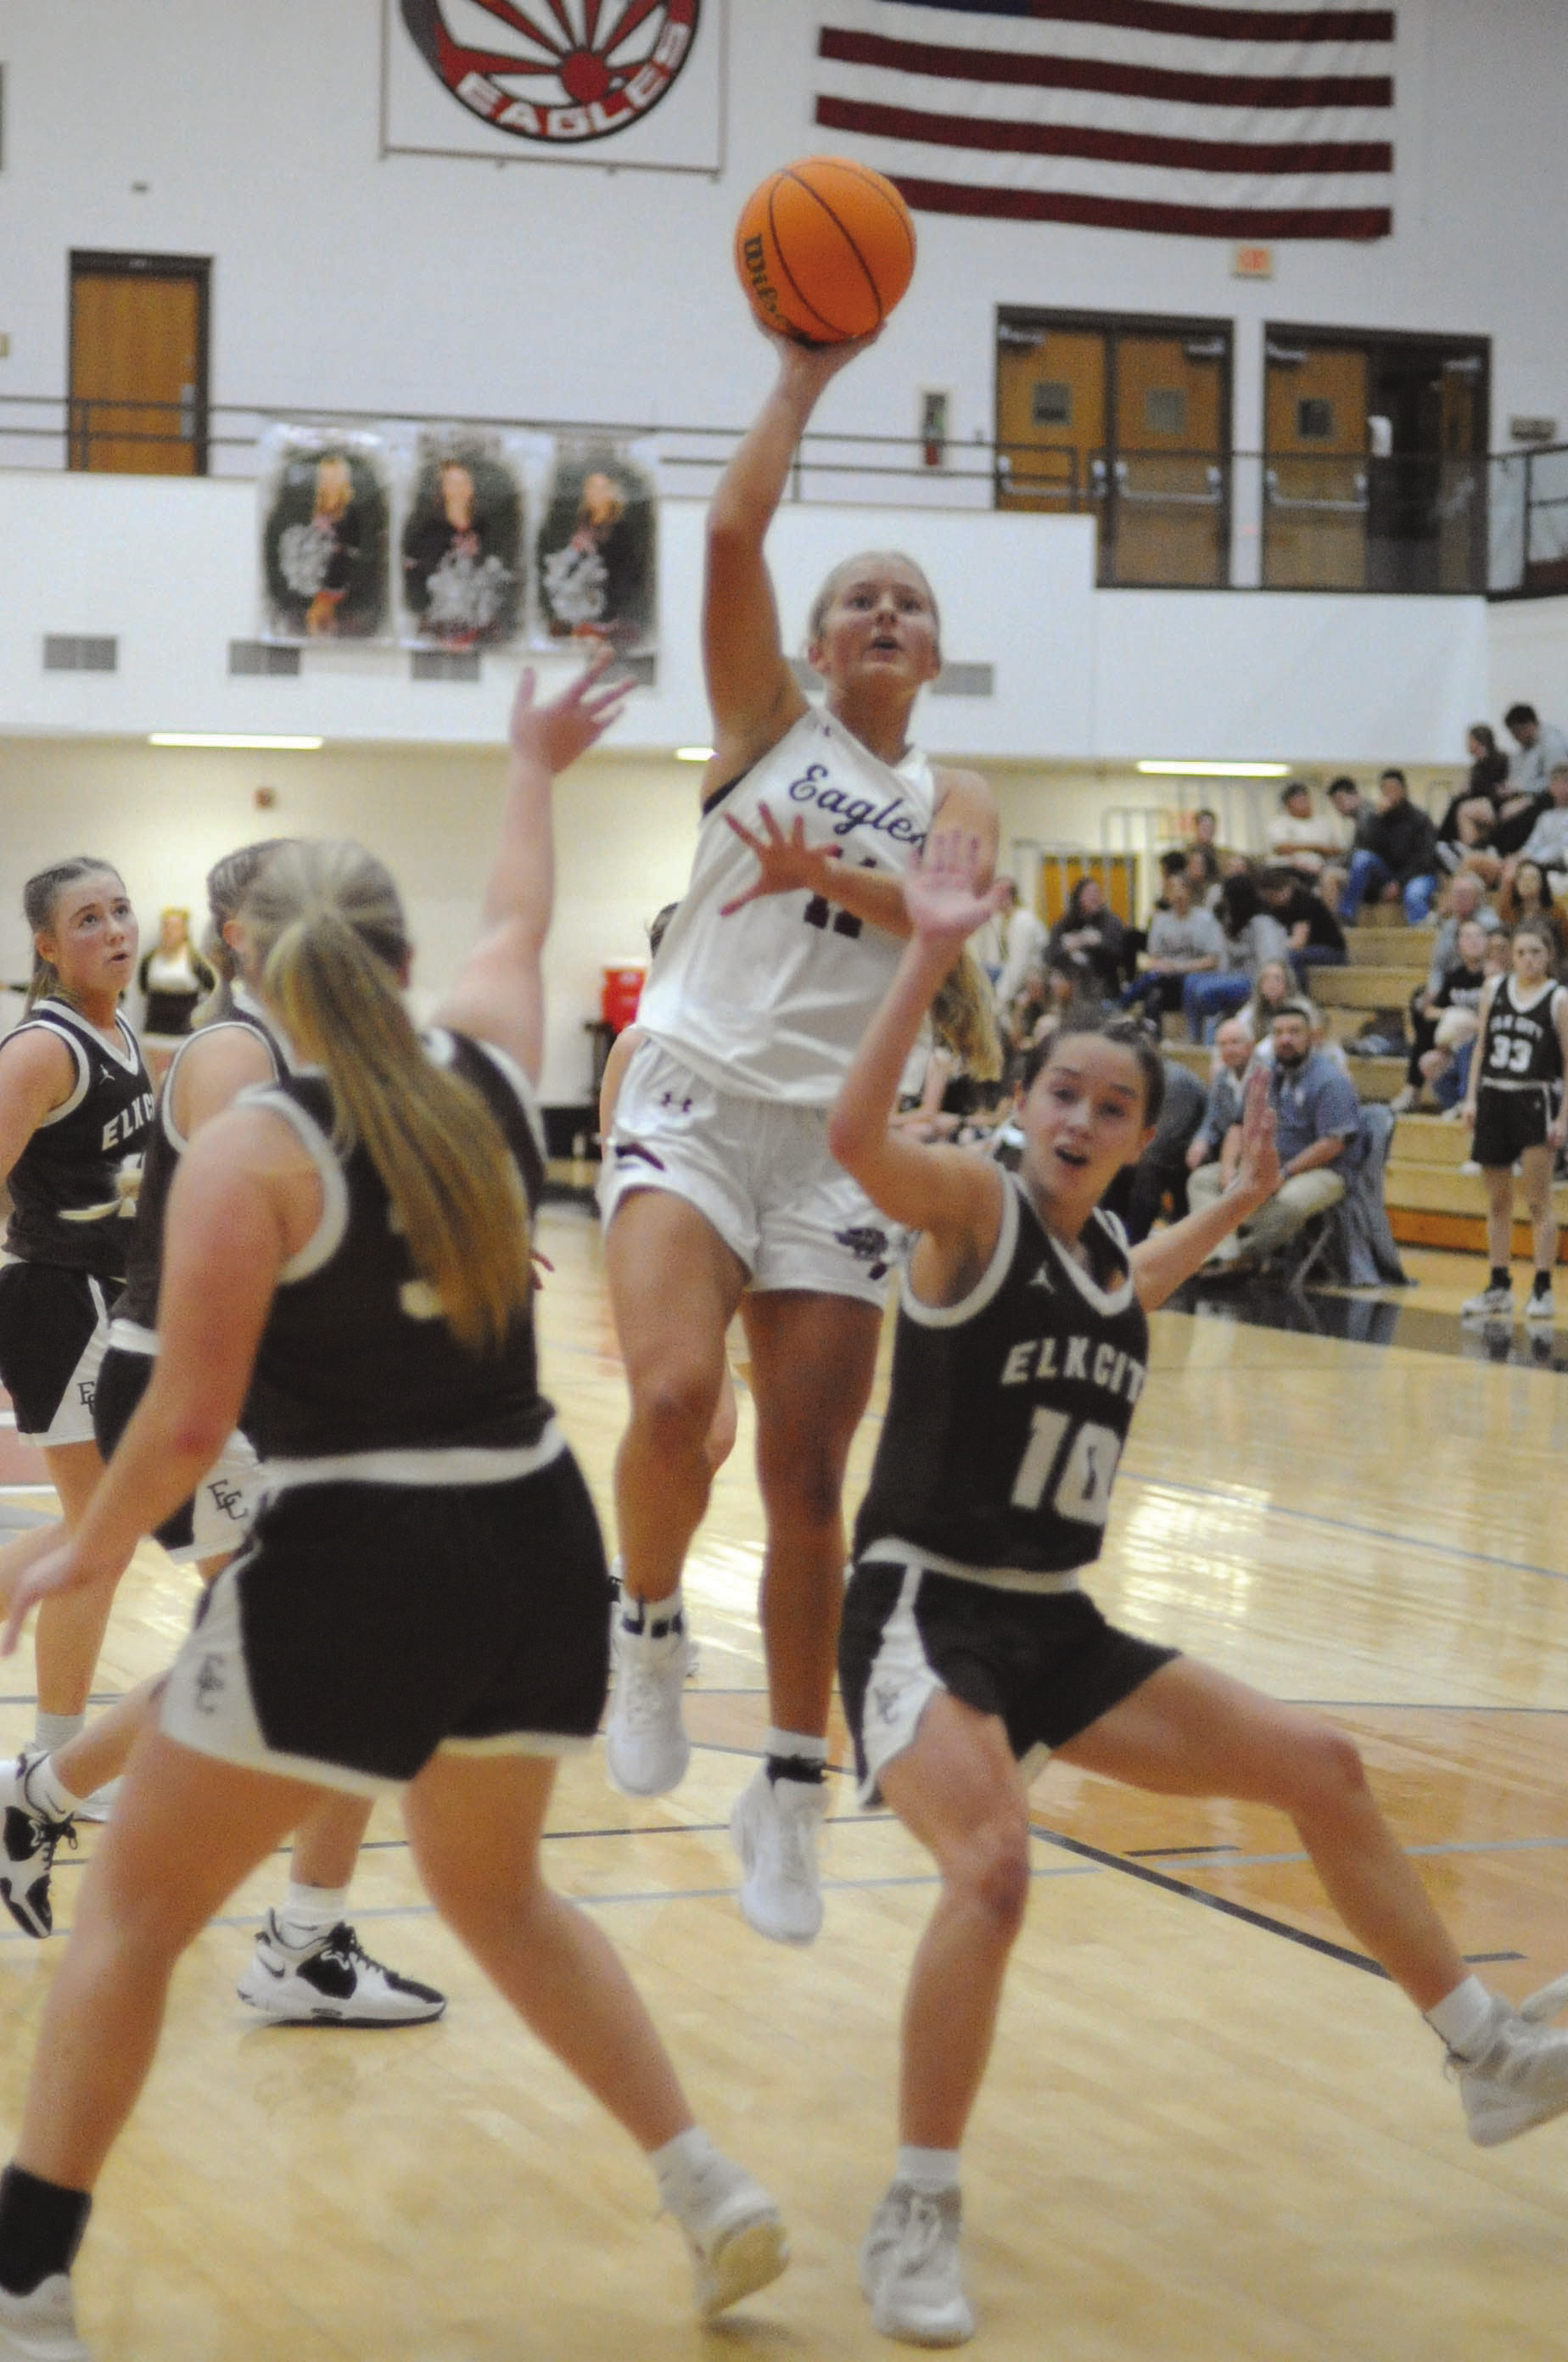 Strong shooting first half propels Lady Eagles to win